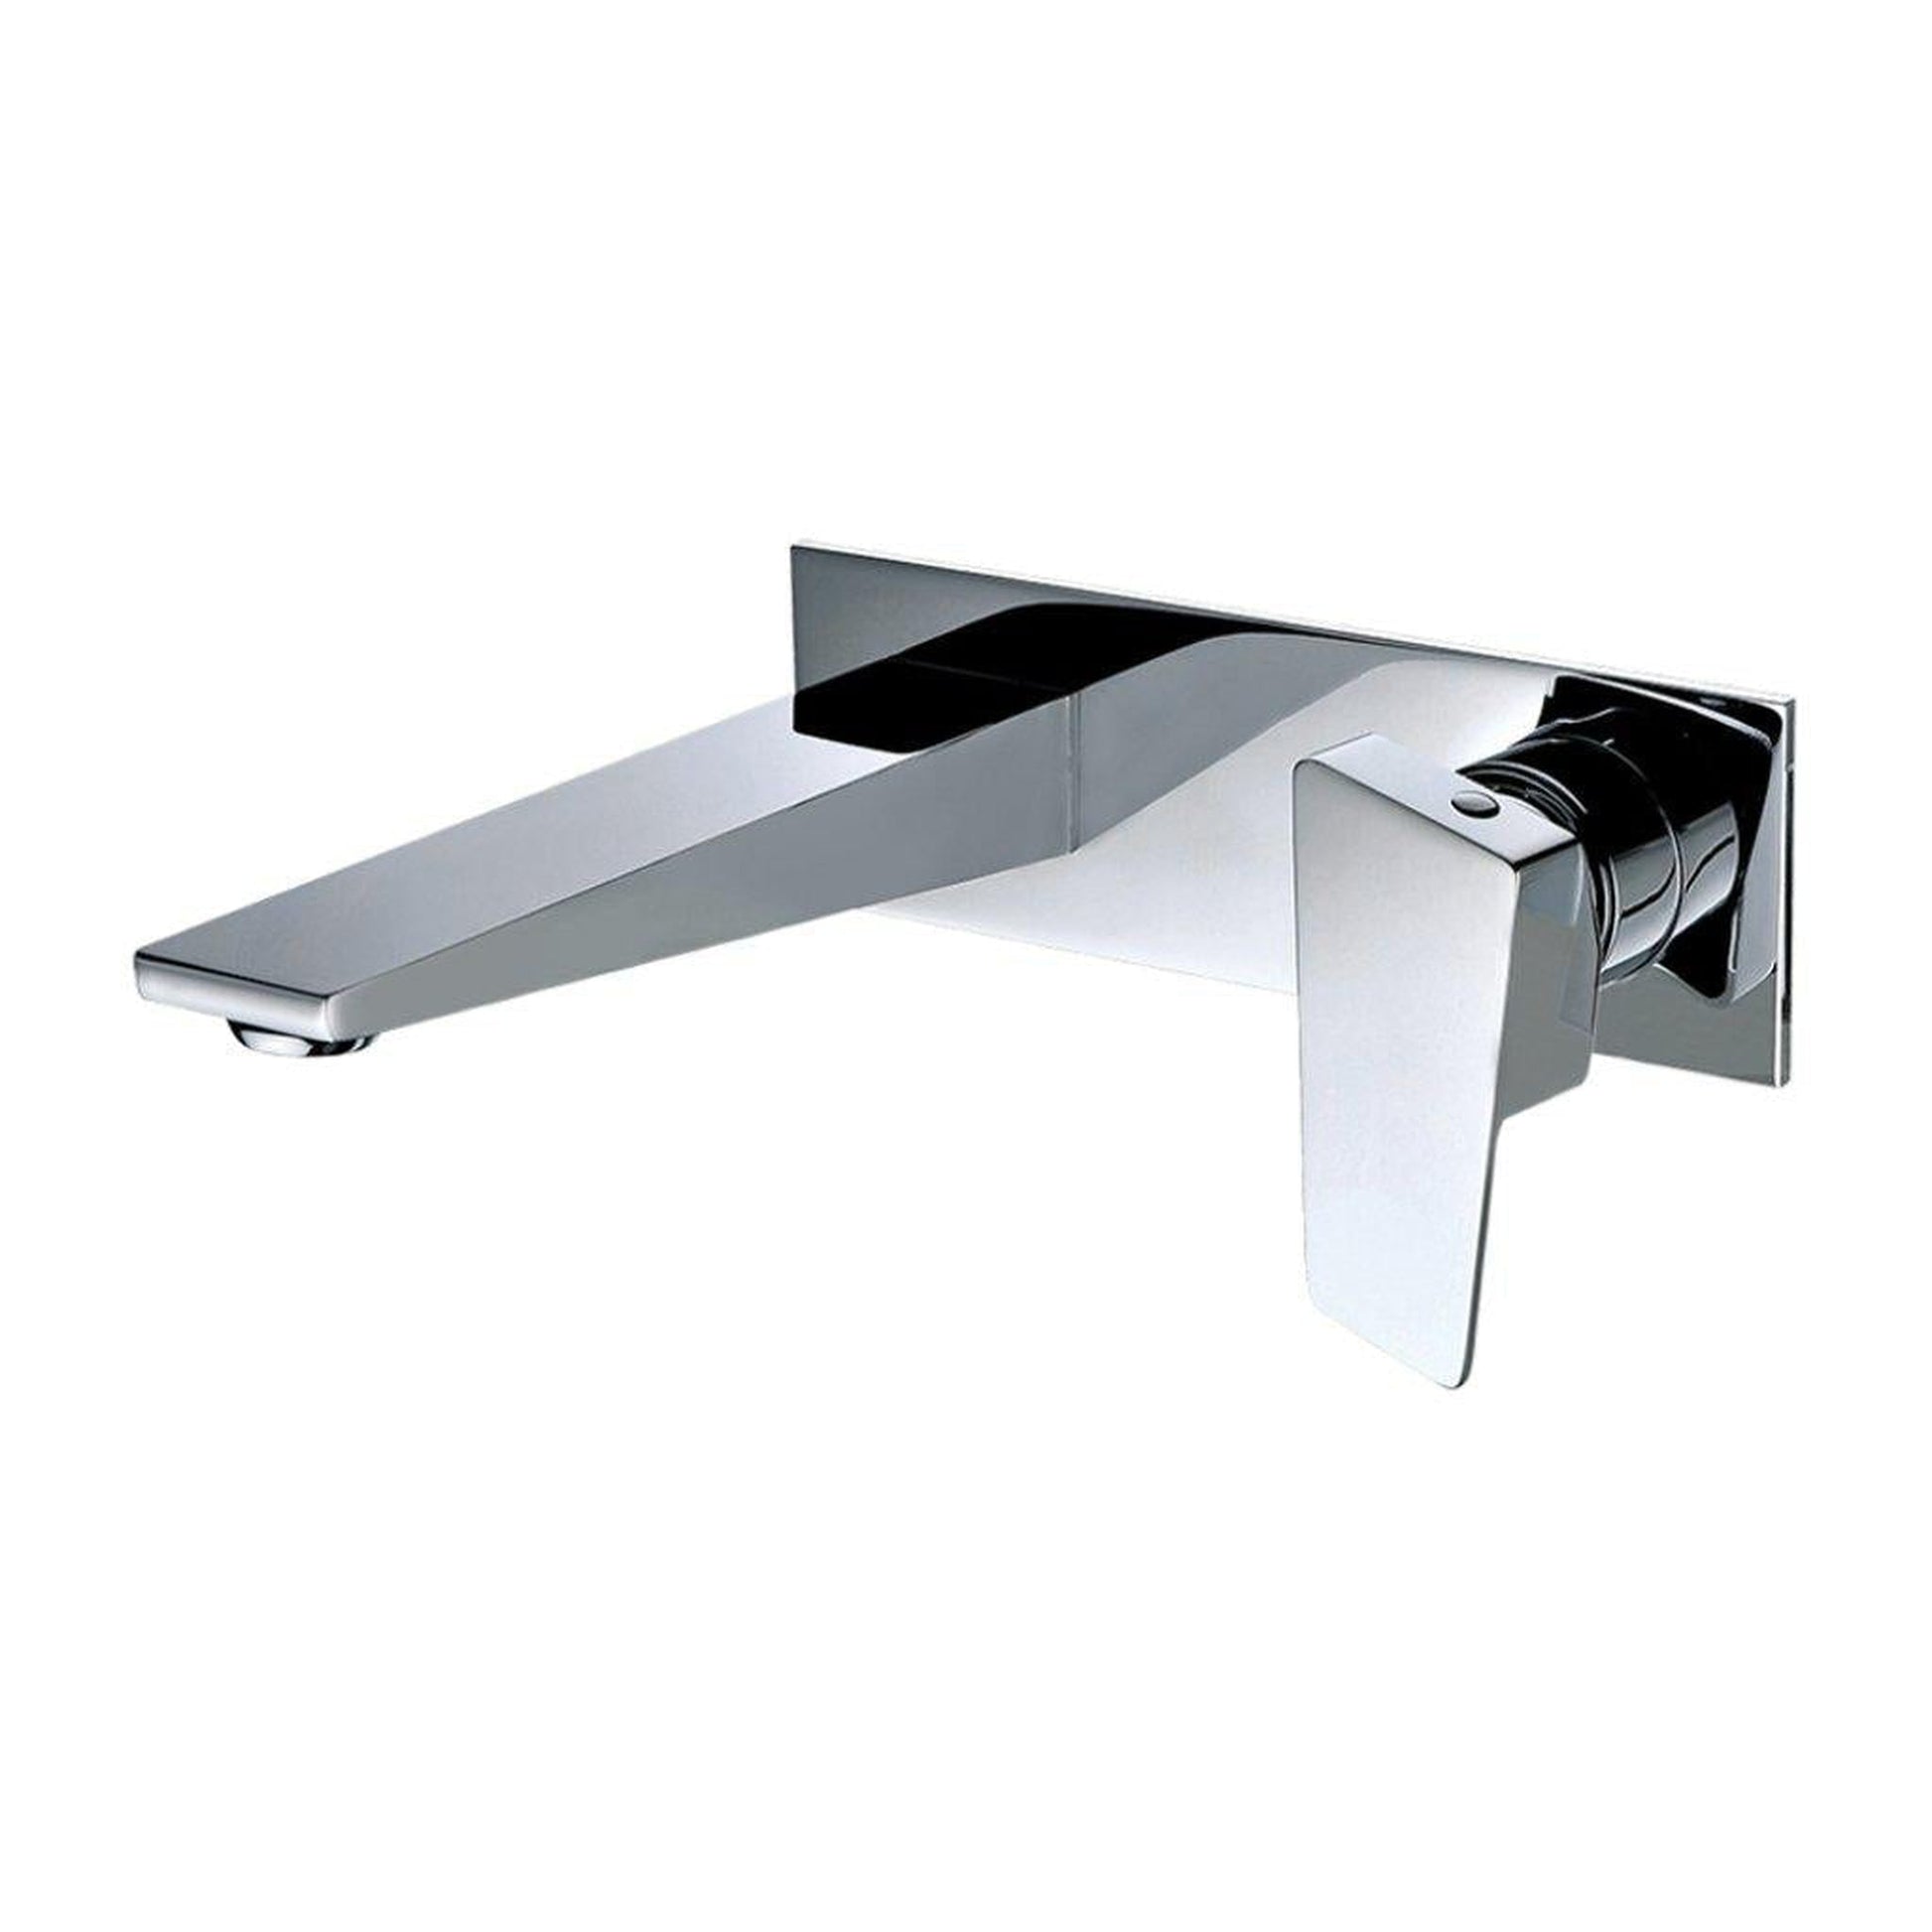 ALFI Brand AB1472-PC Polished Chrome Wall-Mounted Brass Bathroom Sink Faucet With Single Lever